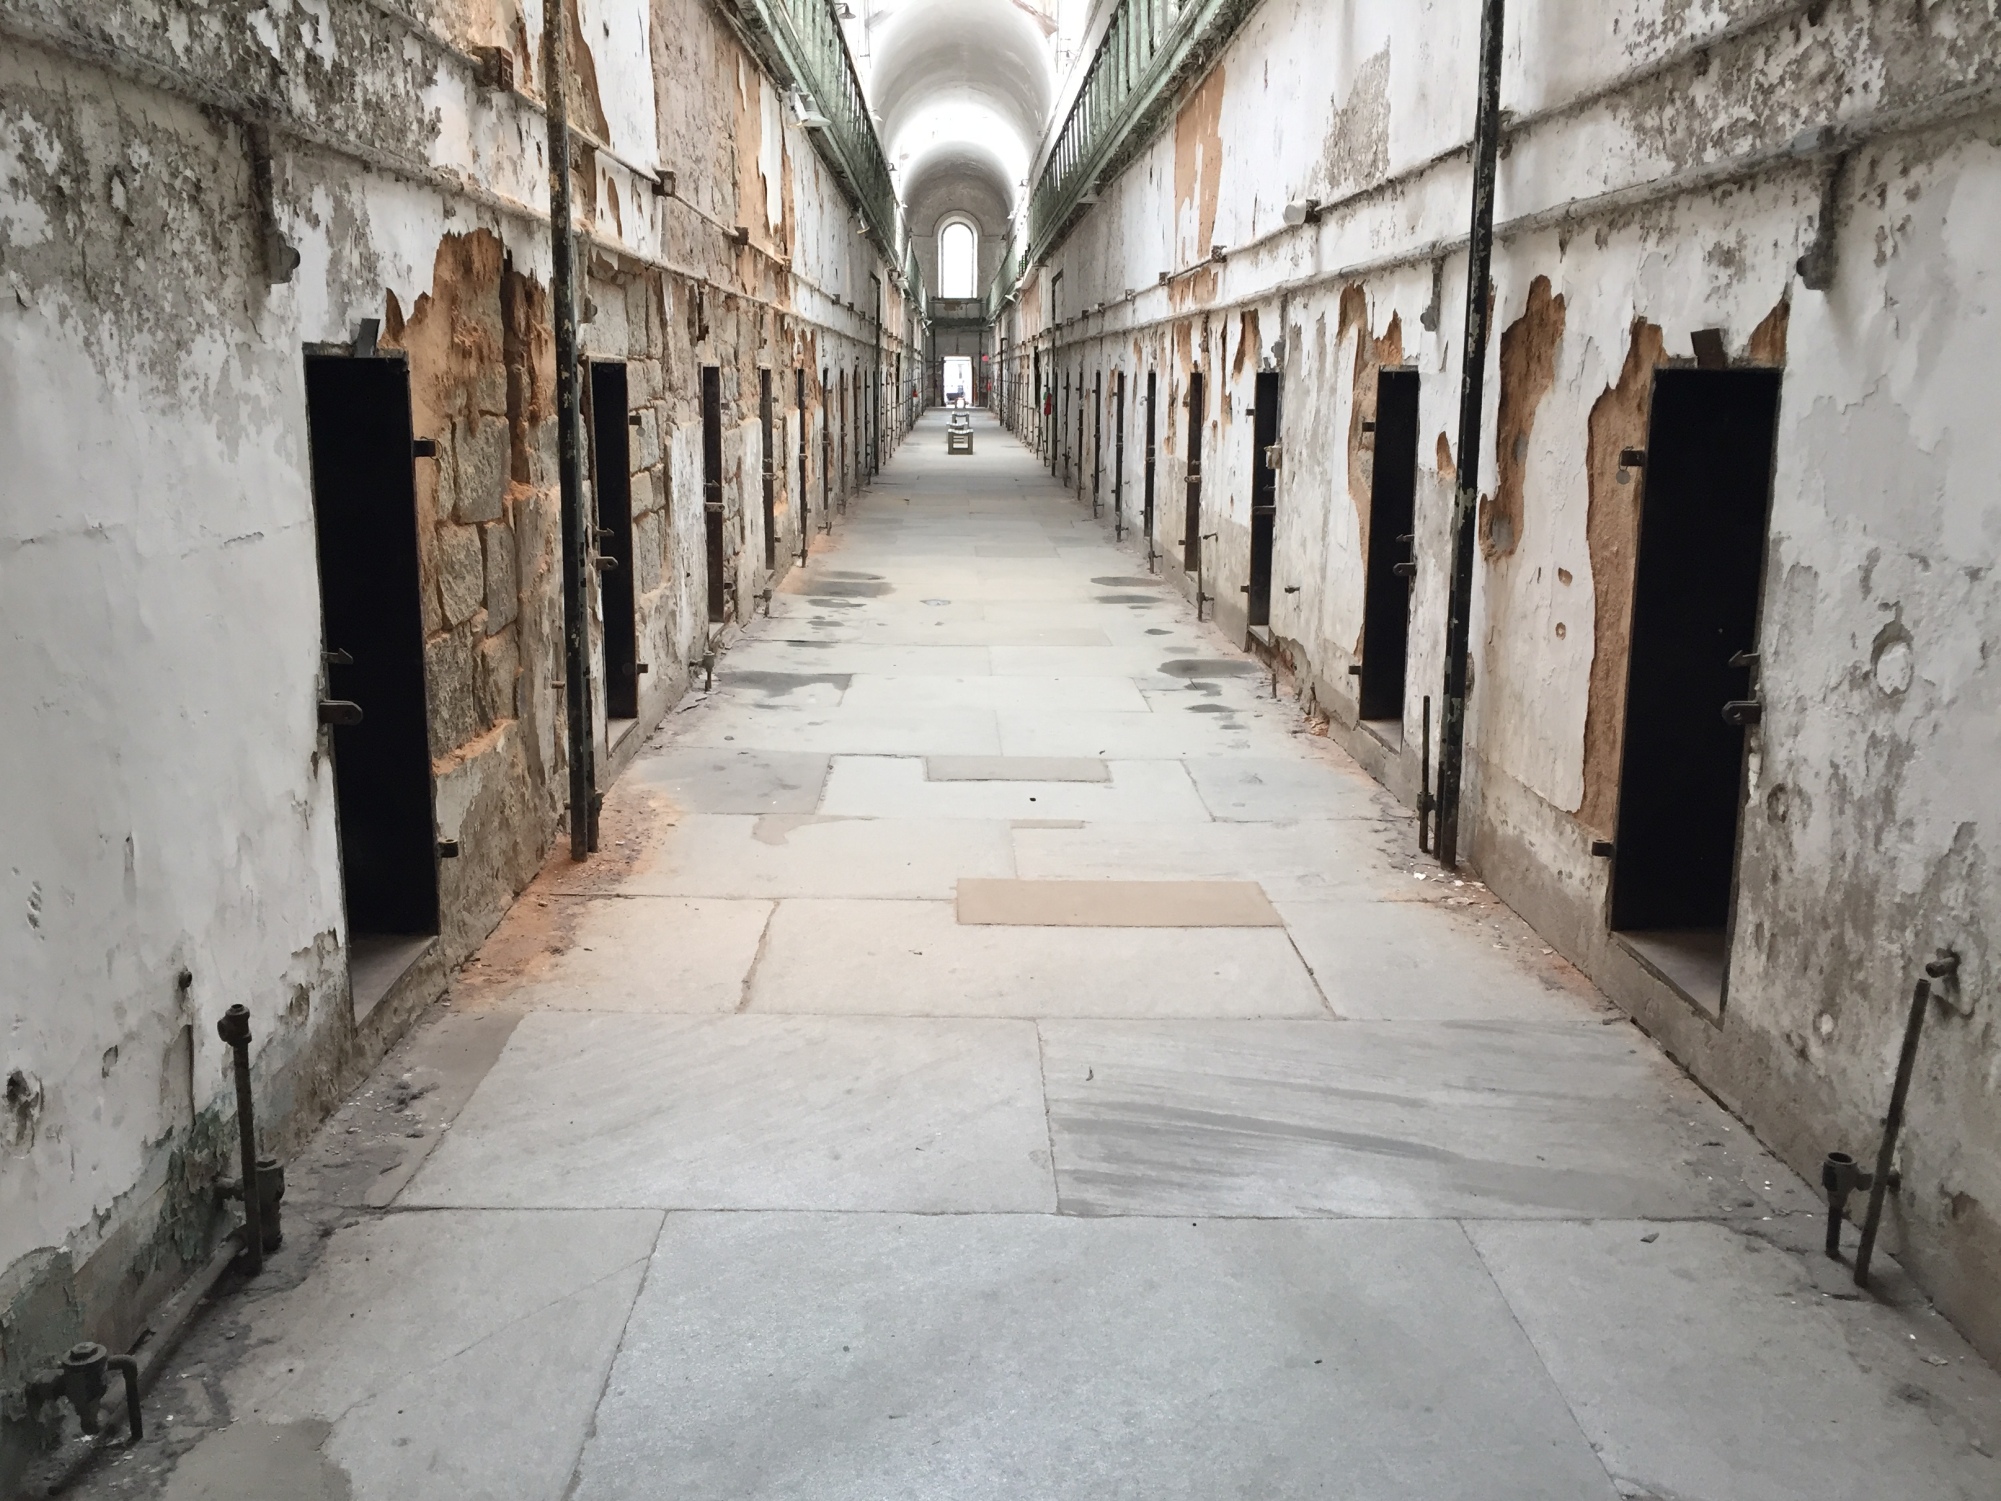 eastern state penitentiary